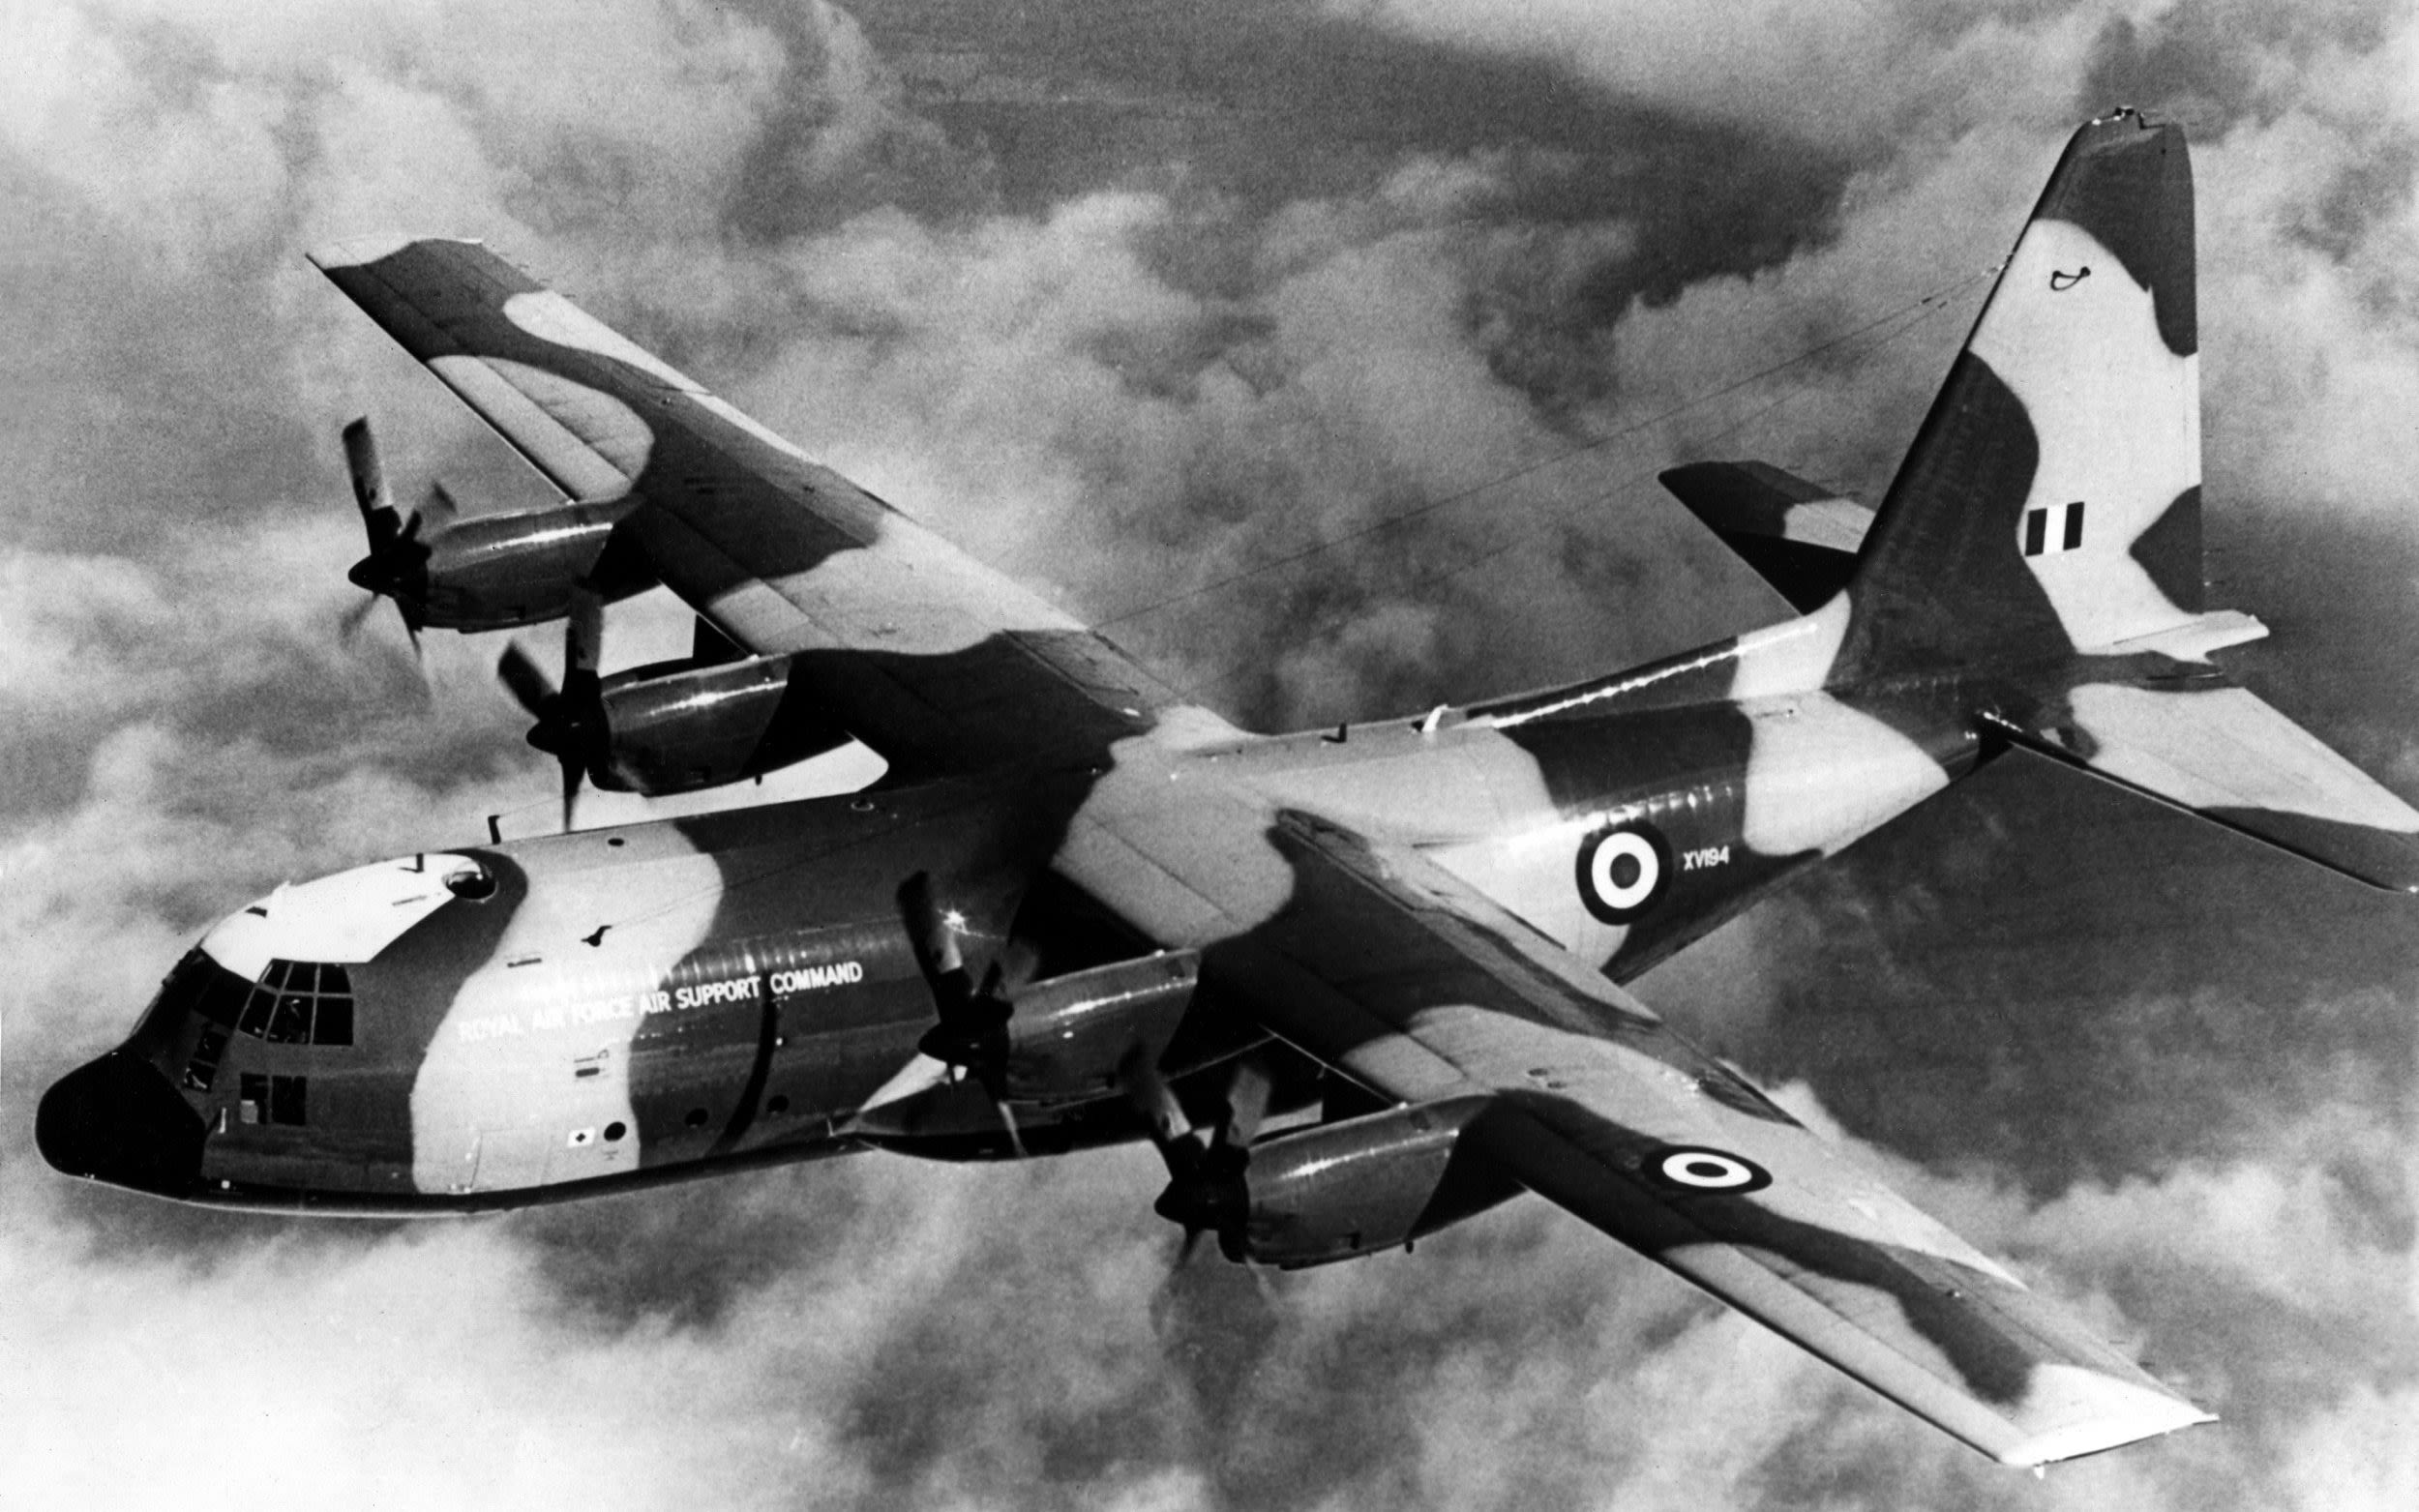 The astonishing story of the RAF Hercules’s most dramatic peacetime mission